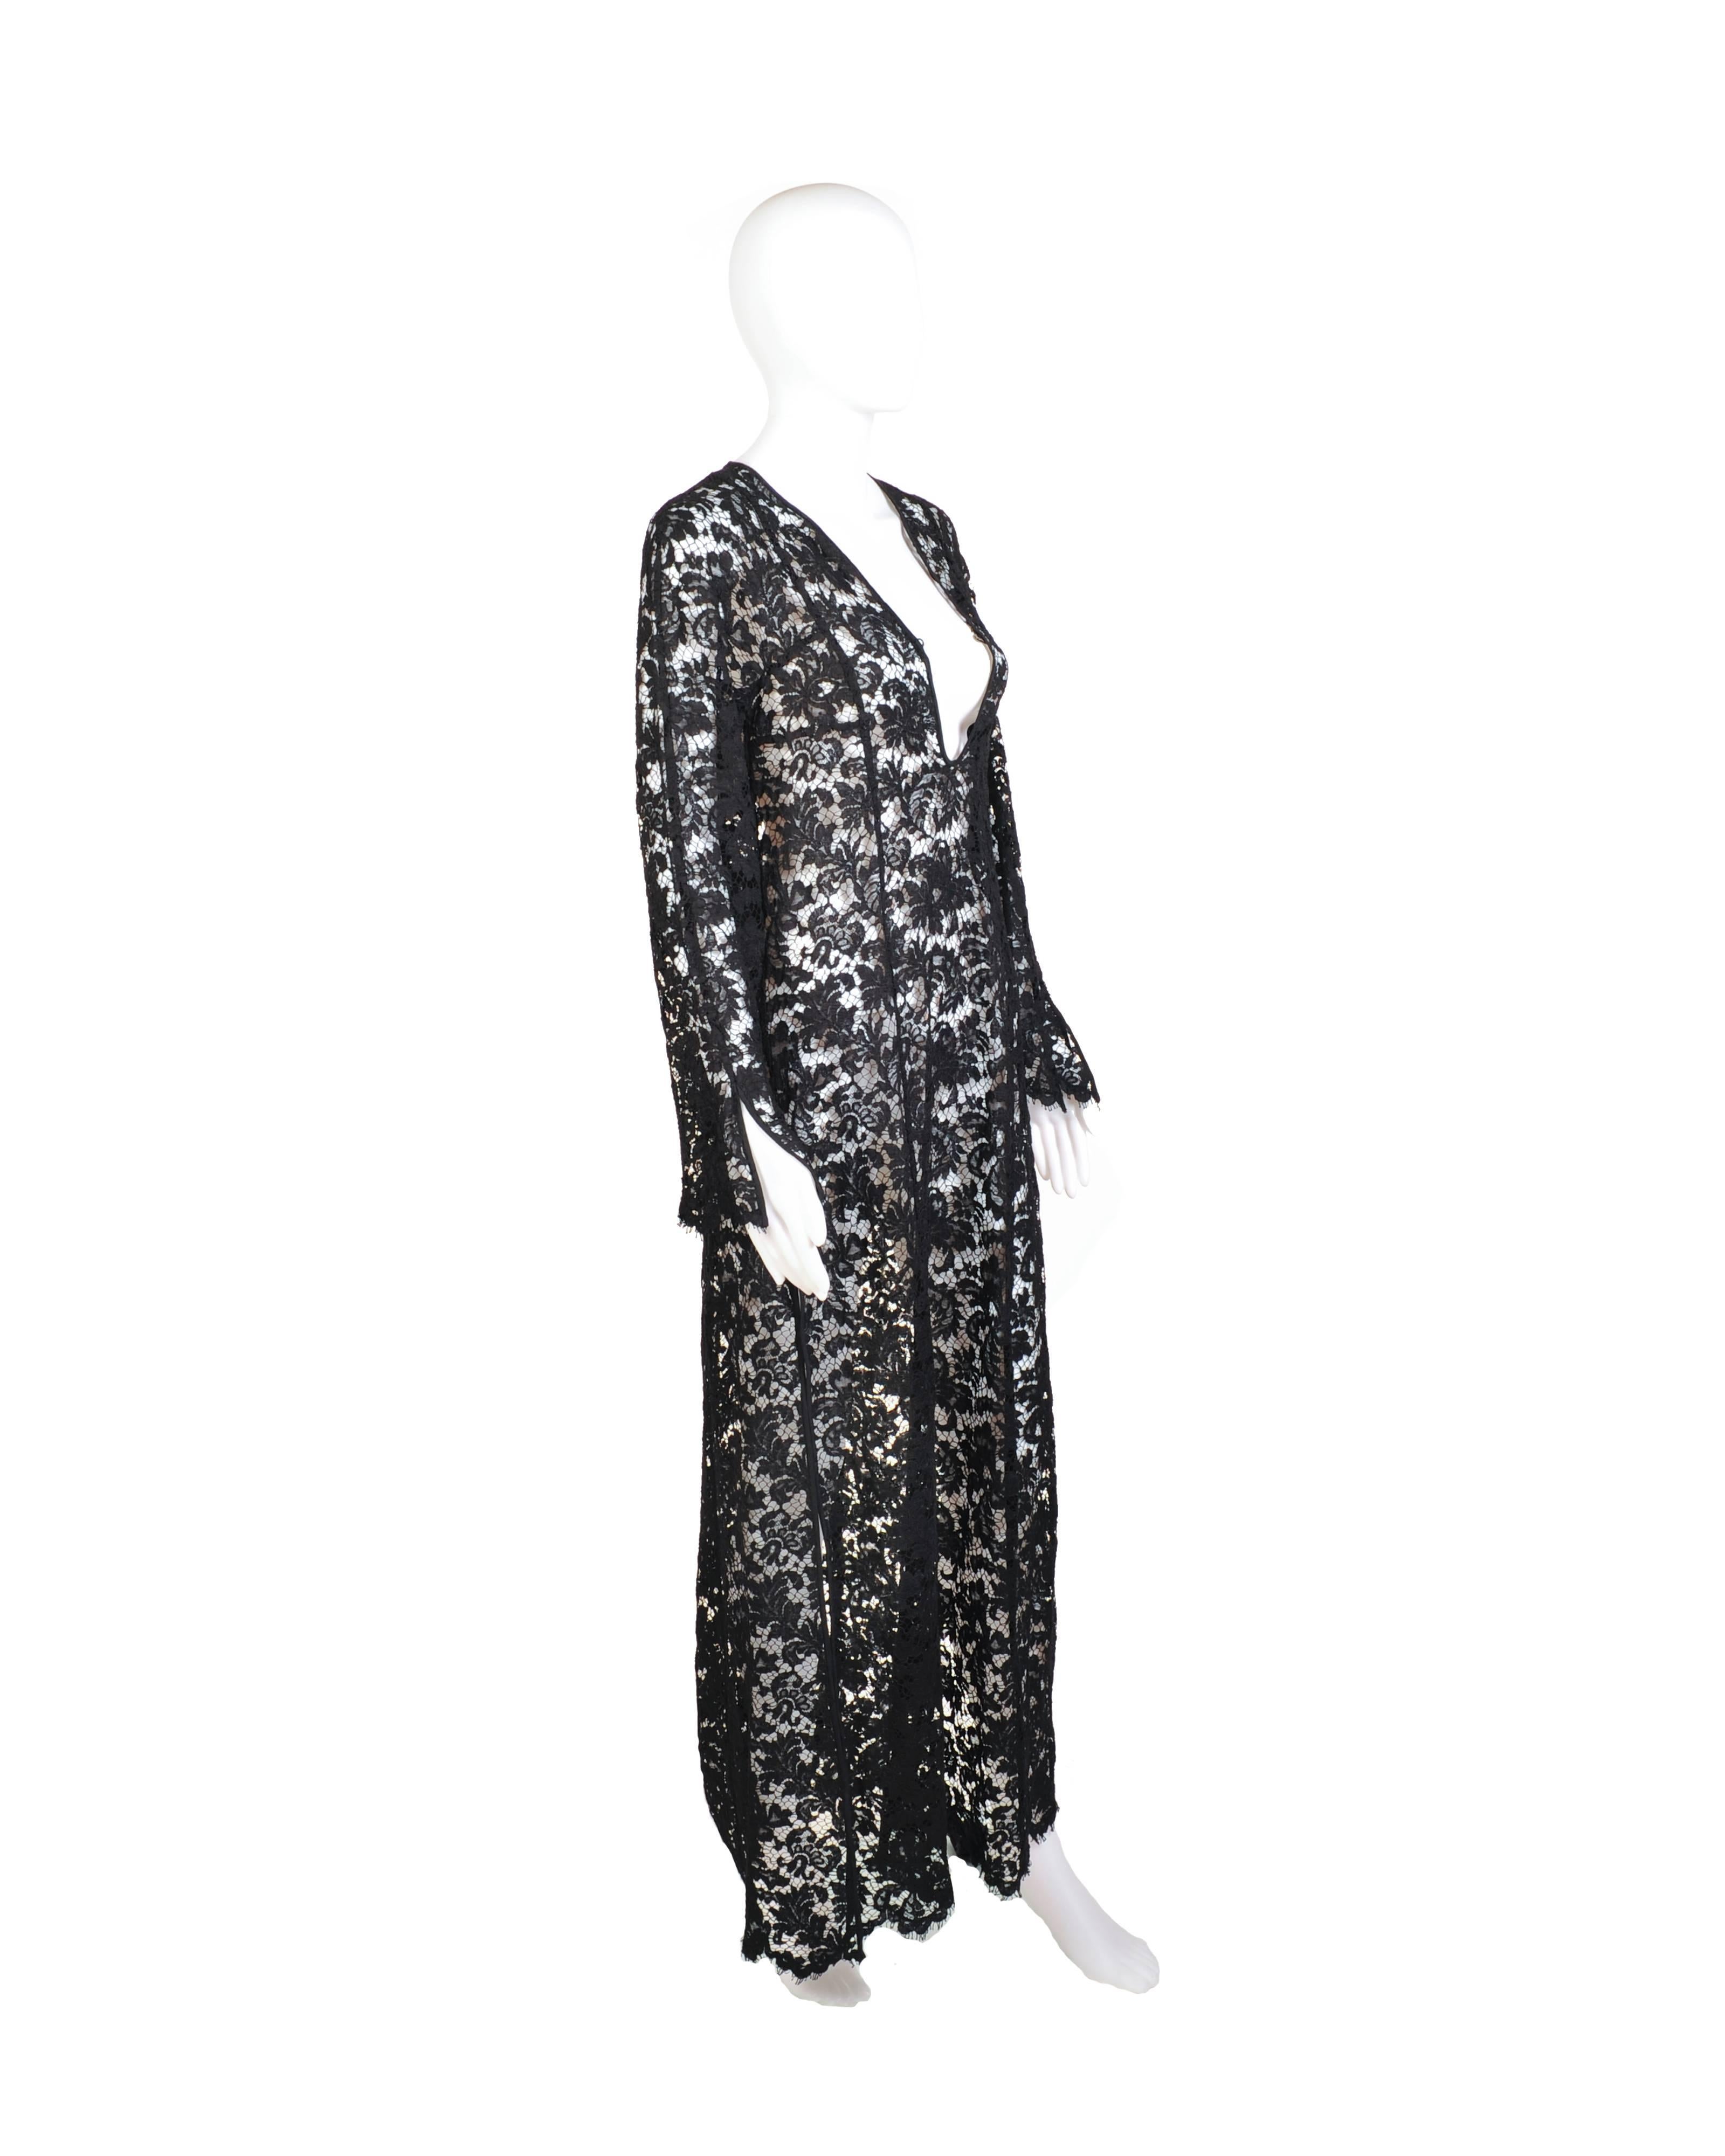 1995 Vintage Iconic Tom Ford for Gucci Black Lace Dress 1